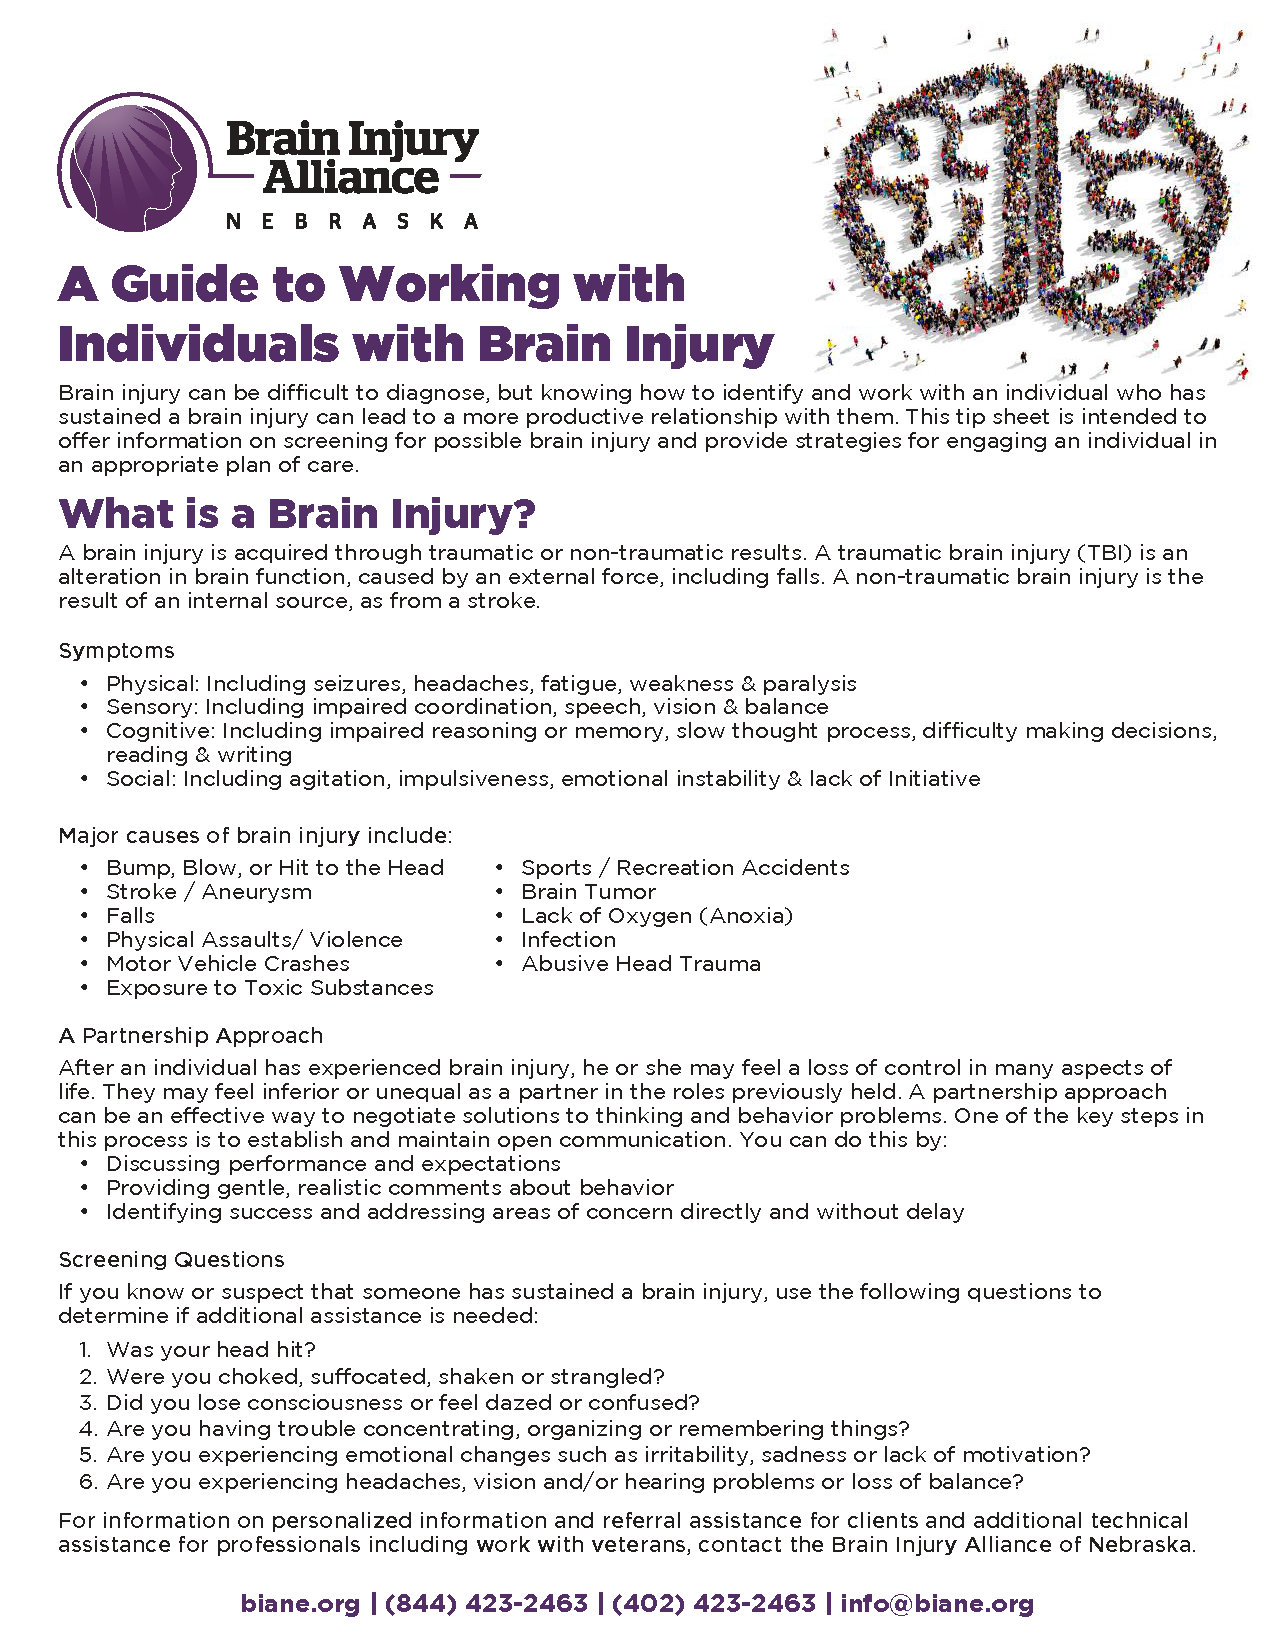 A Guide to Working with Individuals with Brain Injury 